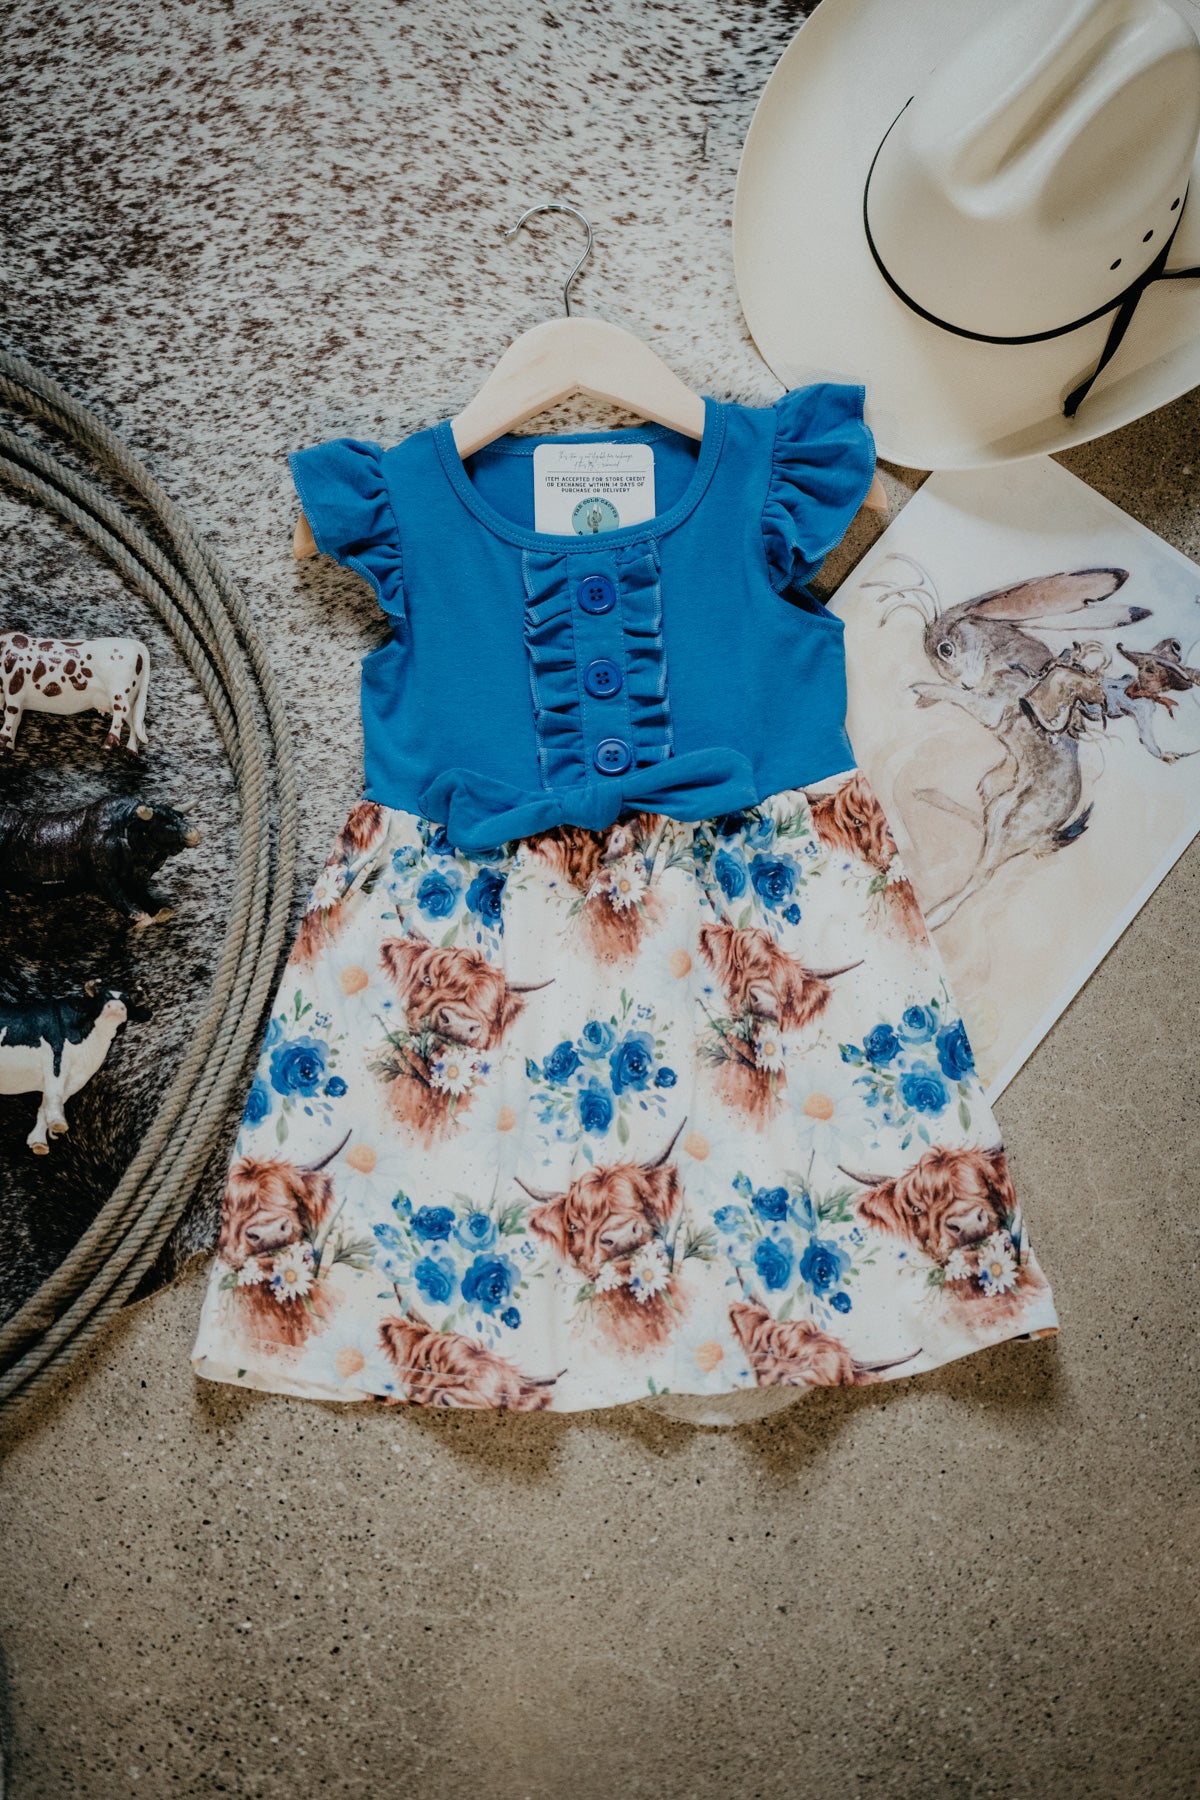 Blue and Highland Print Dress (12-18M to 8/9T)